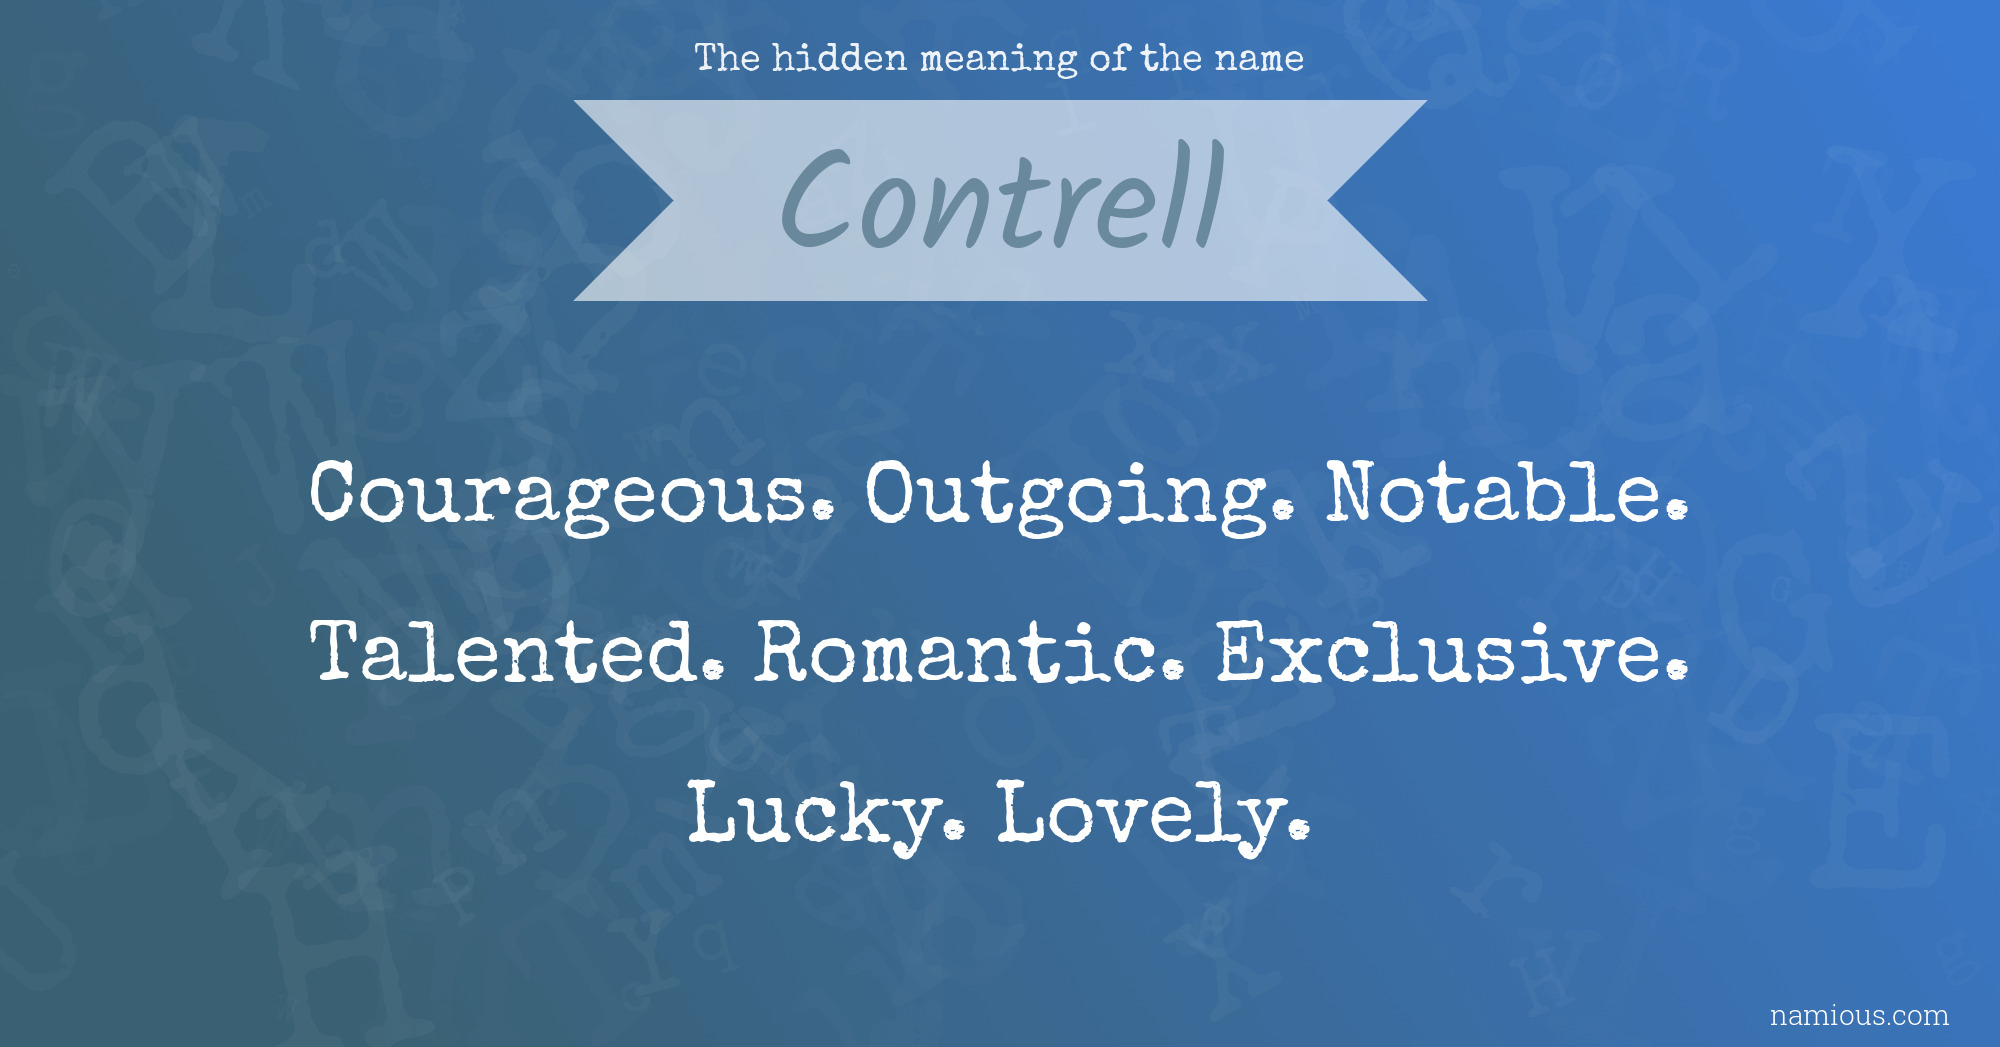 The hidden meaning of the name Contrell